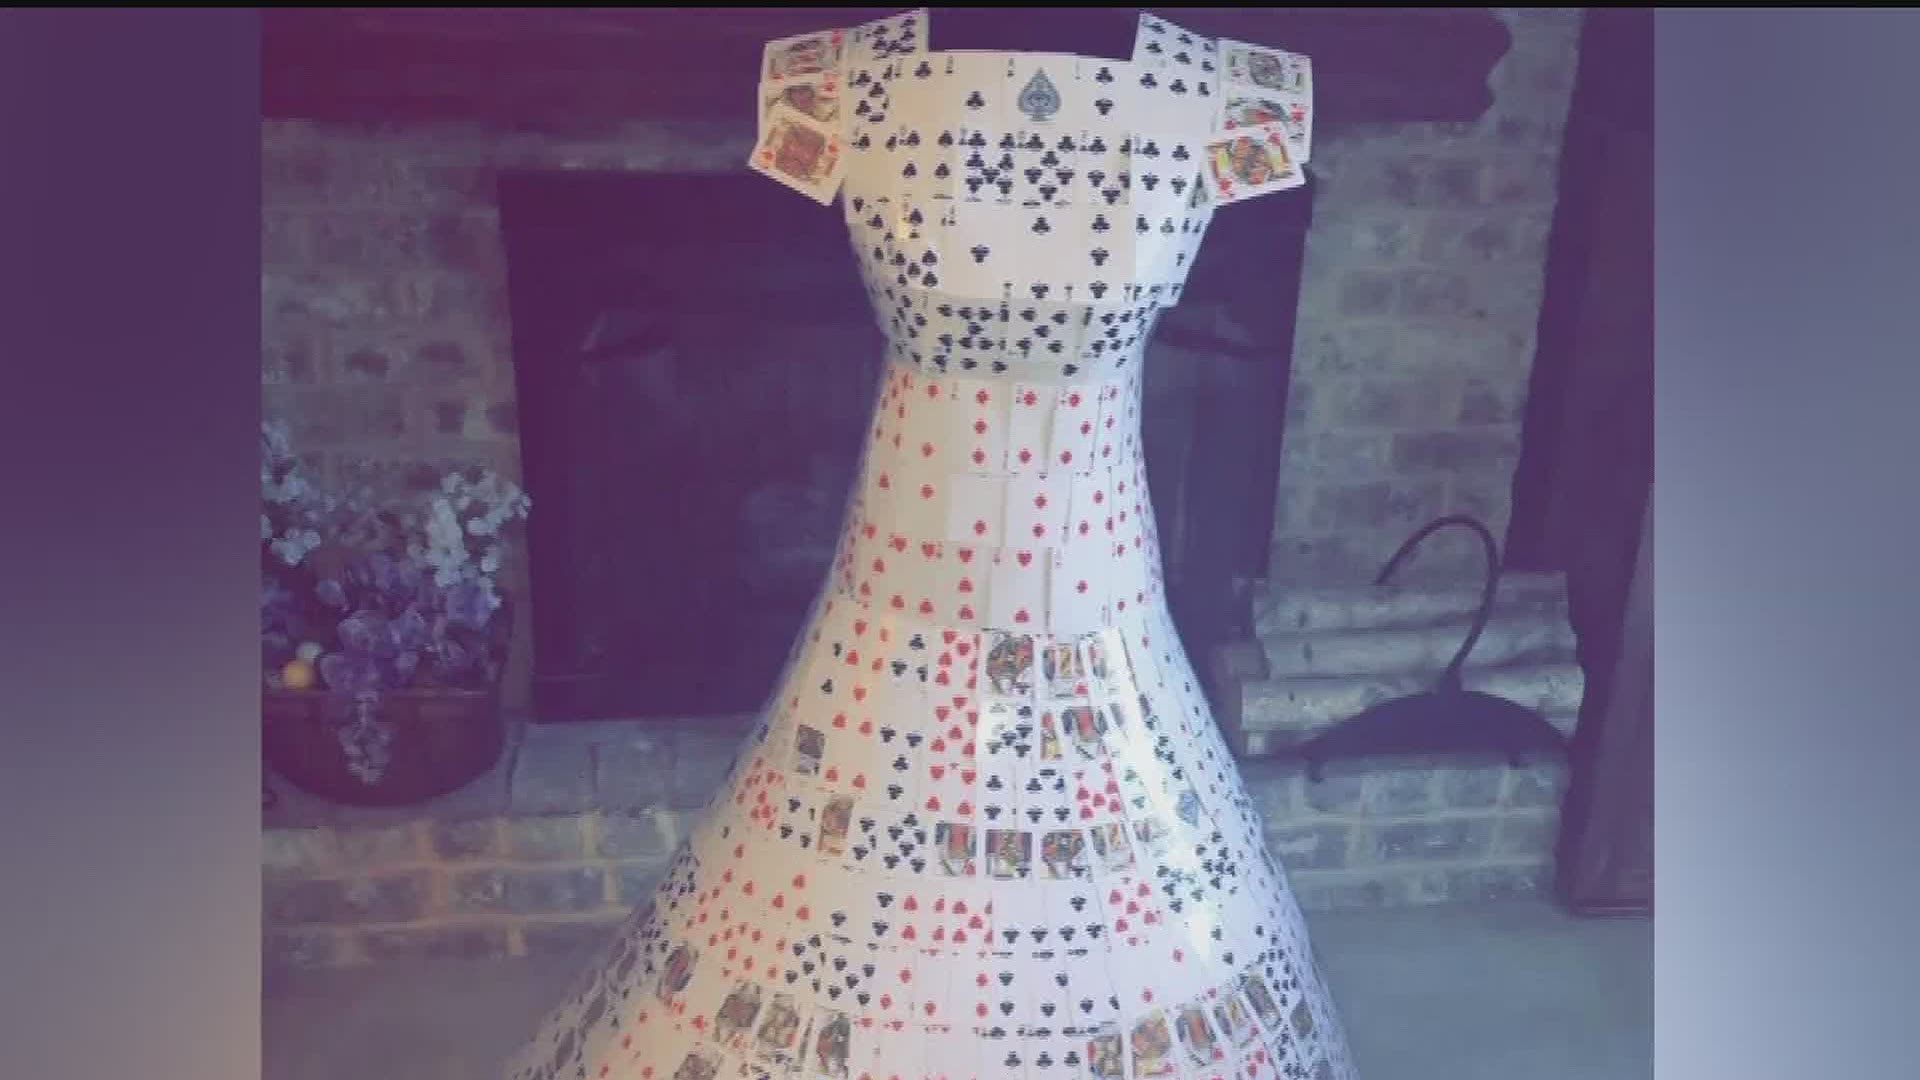 A 2020 graduate from Central Dauphin East High School is making outfits out of household materials to pass the time during the pandemic.